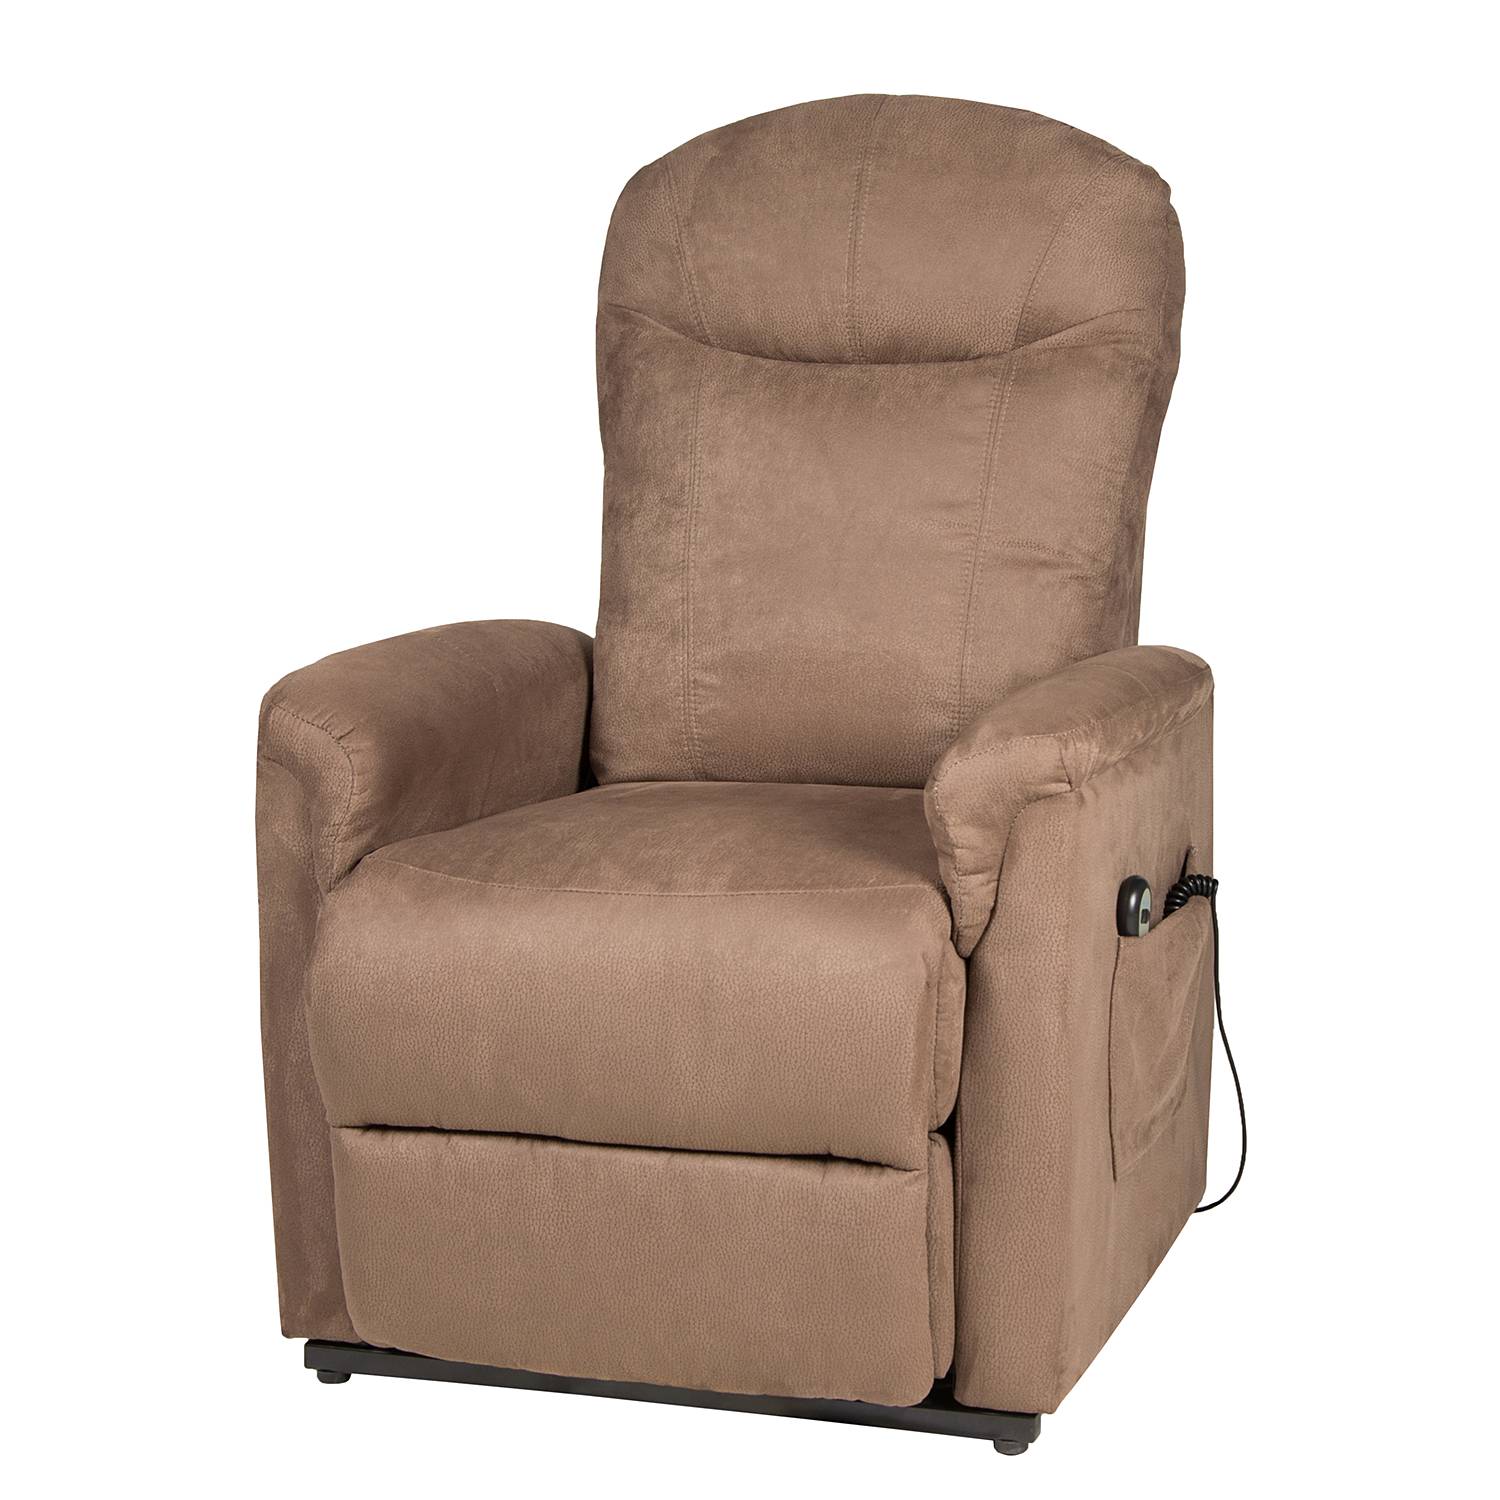 Image of Fauteuil de relaxation Tomino 000000001000210762